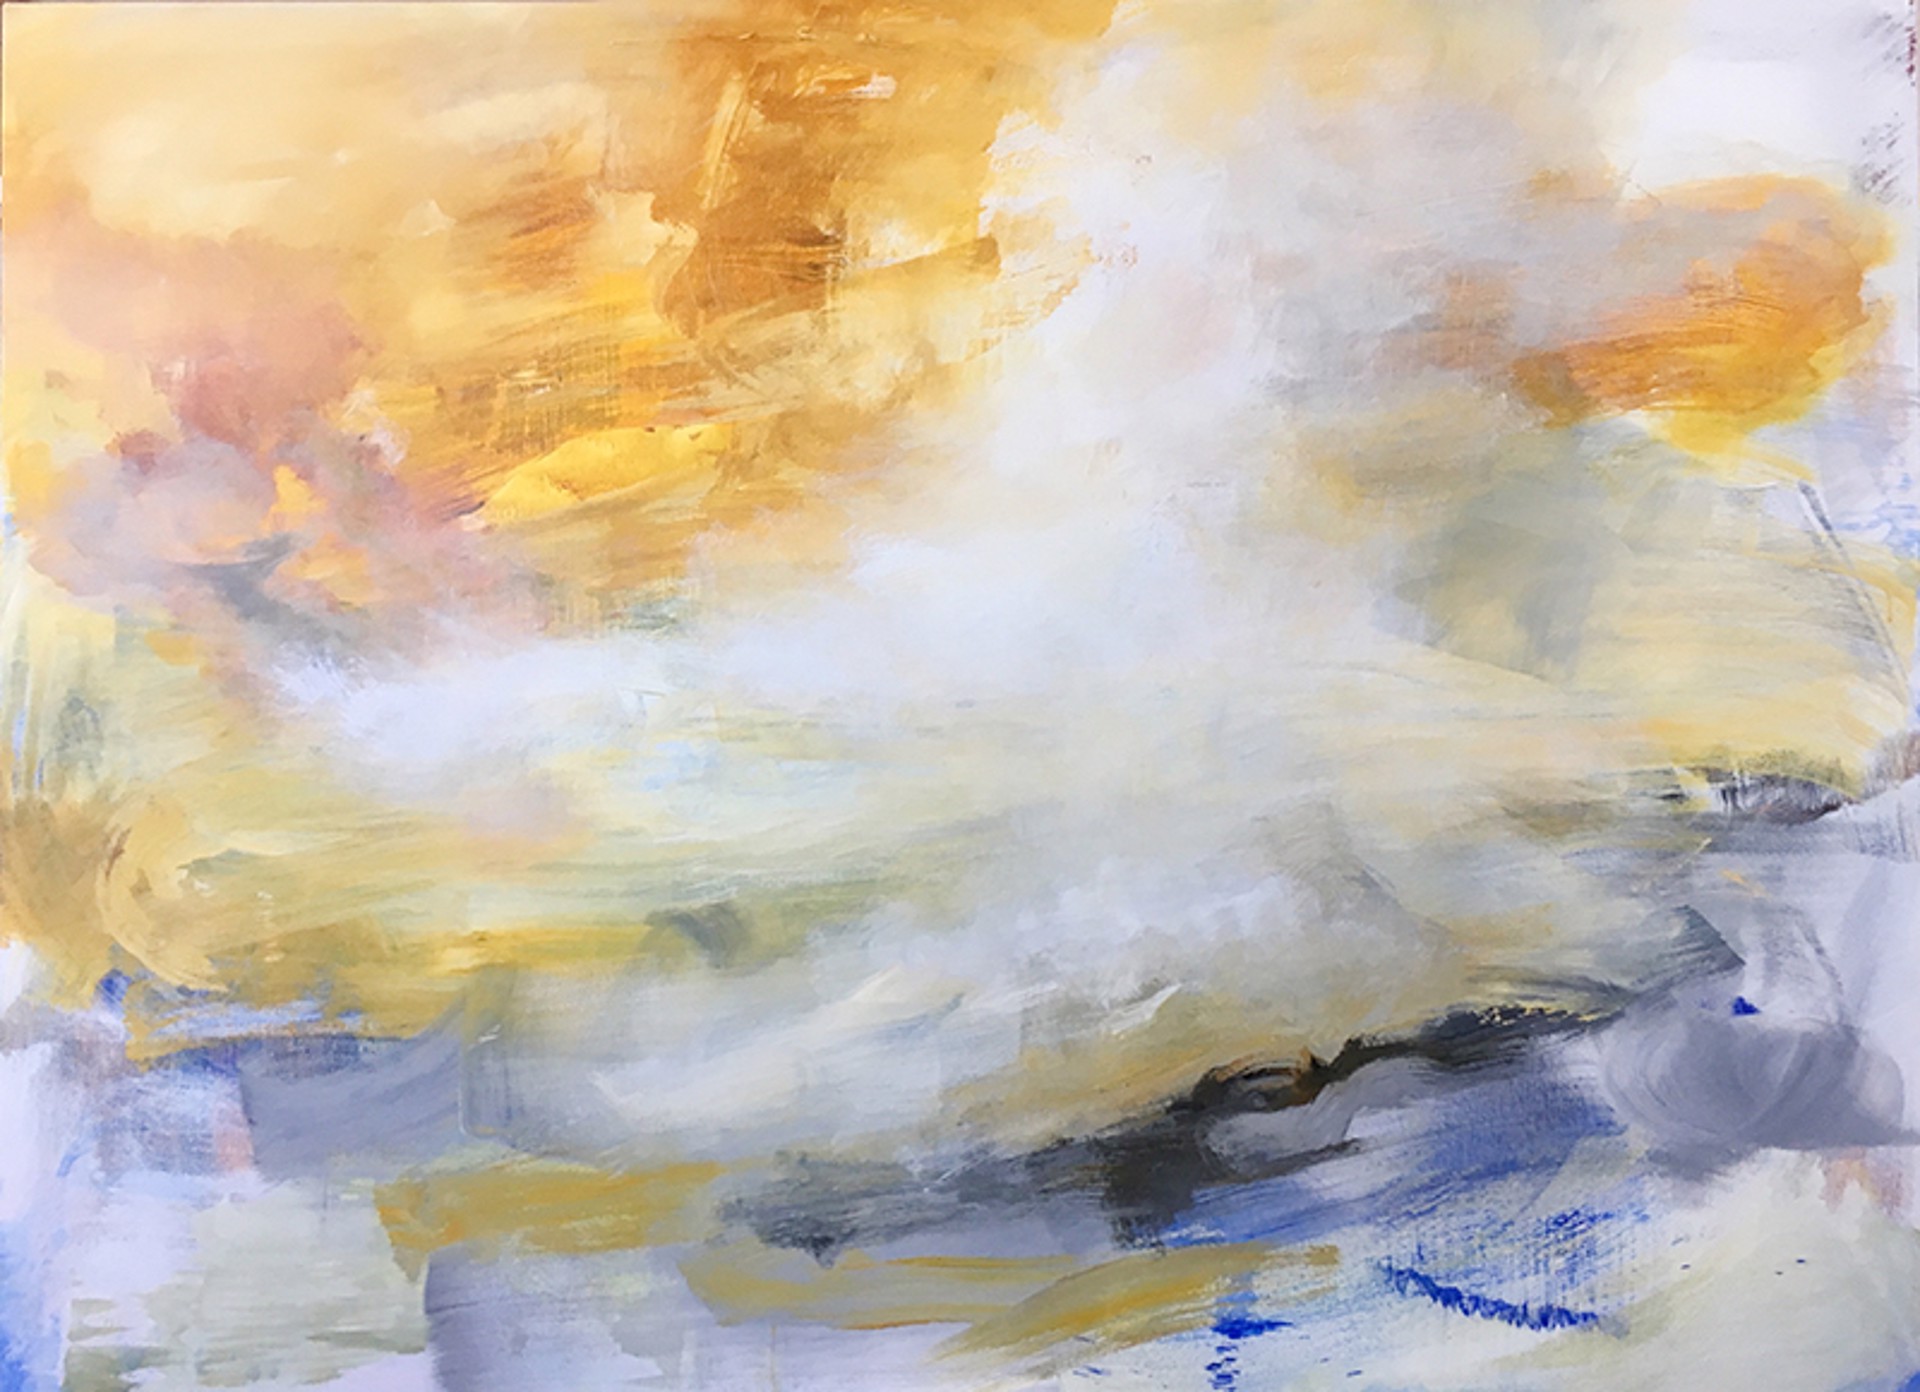 Sky Expanse by Kathy Buist